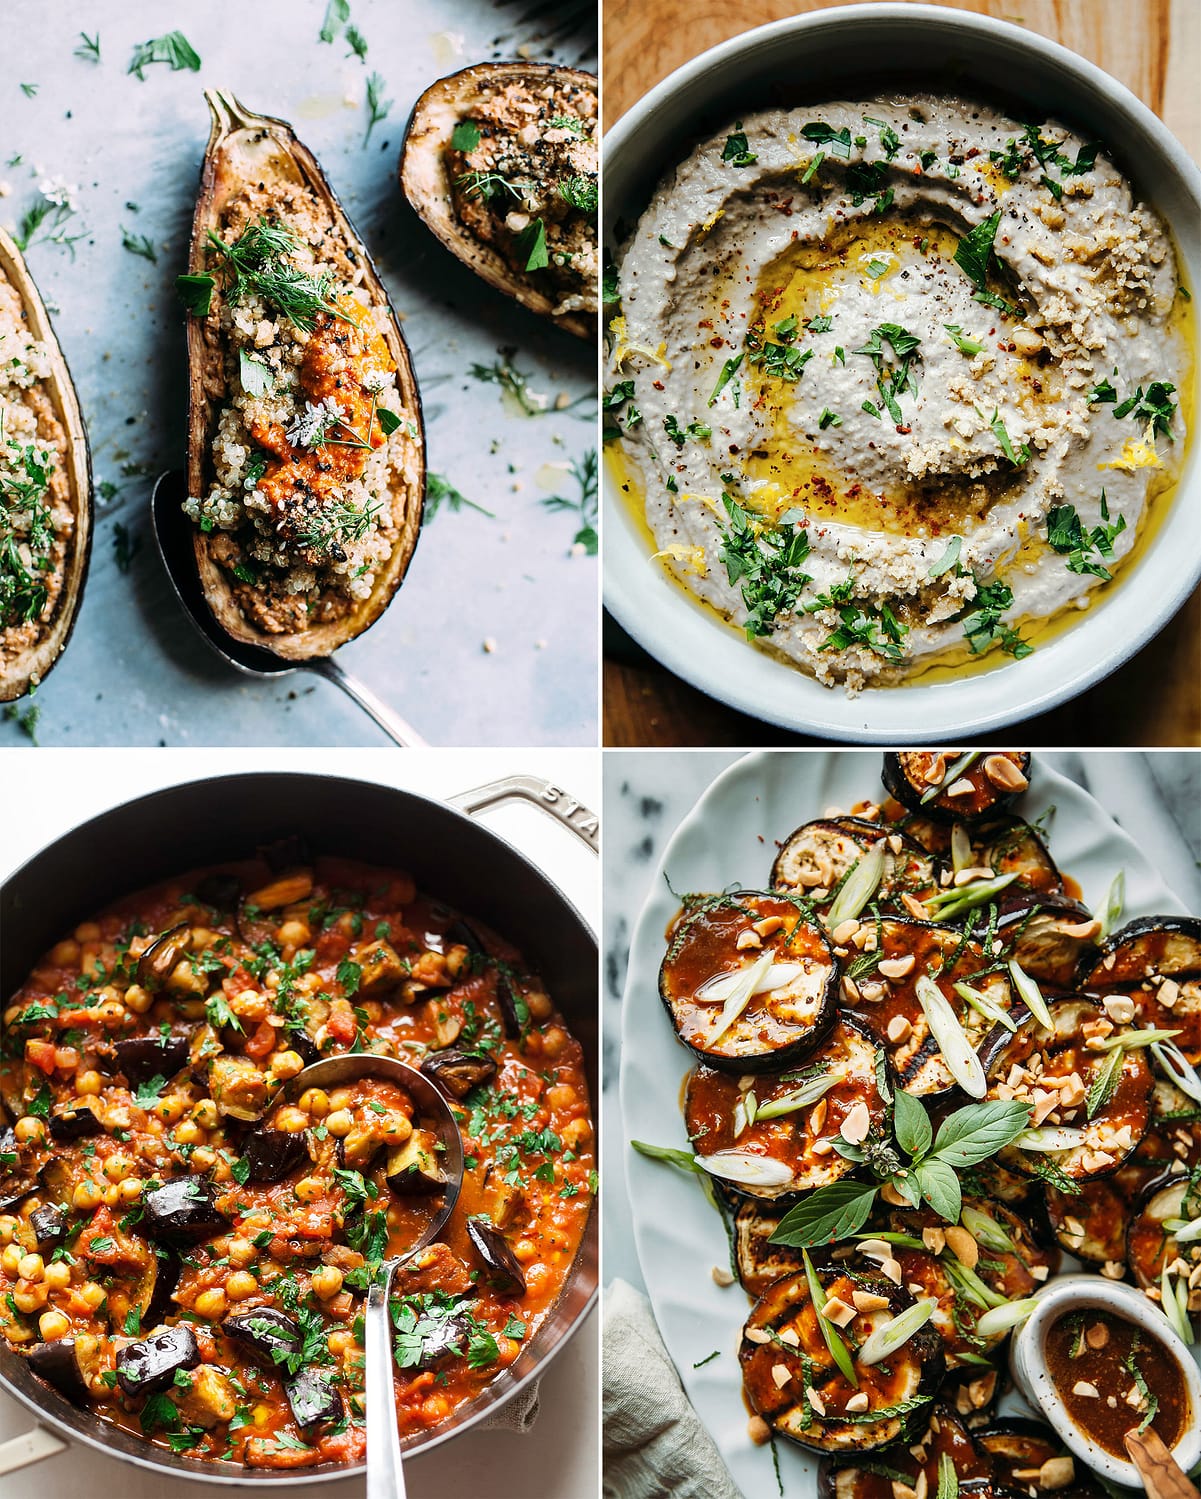 4 images in a grid show the following: a stuffed eggplant half with a light red sauce, a bowl of creamy beige dip, a chunky eggplant and tomato stew, and slices of grilled eggplant with a brown sauce drizzled over the top.